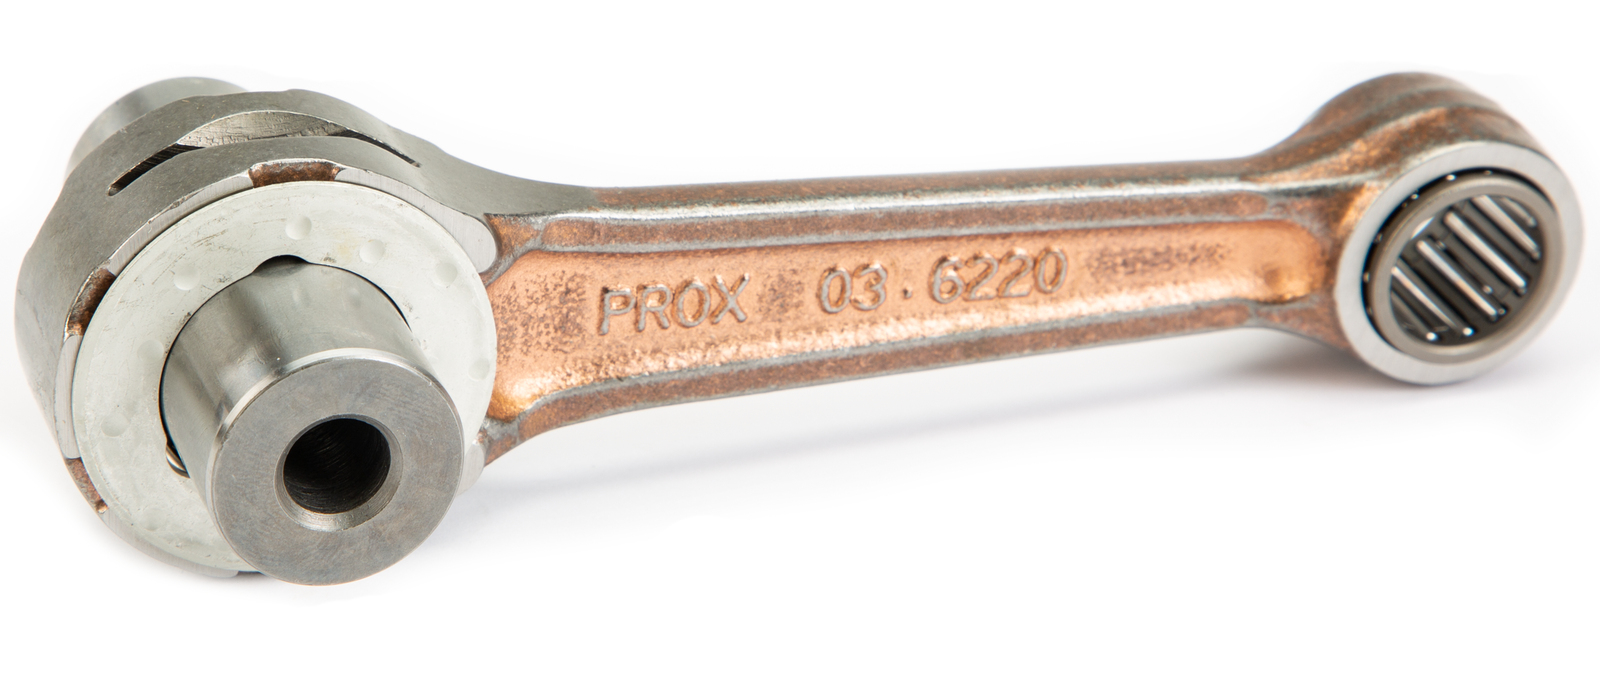 Prox Racing Parts 03.6220 Connecting Rod Kit 